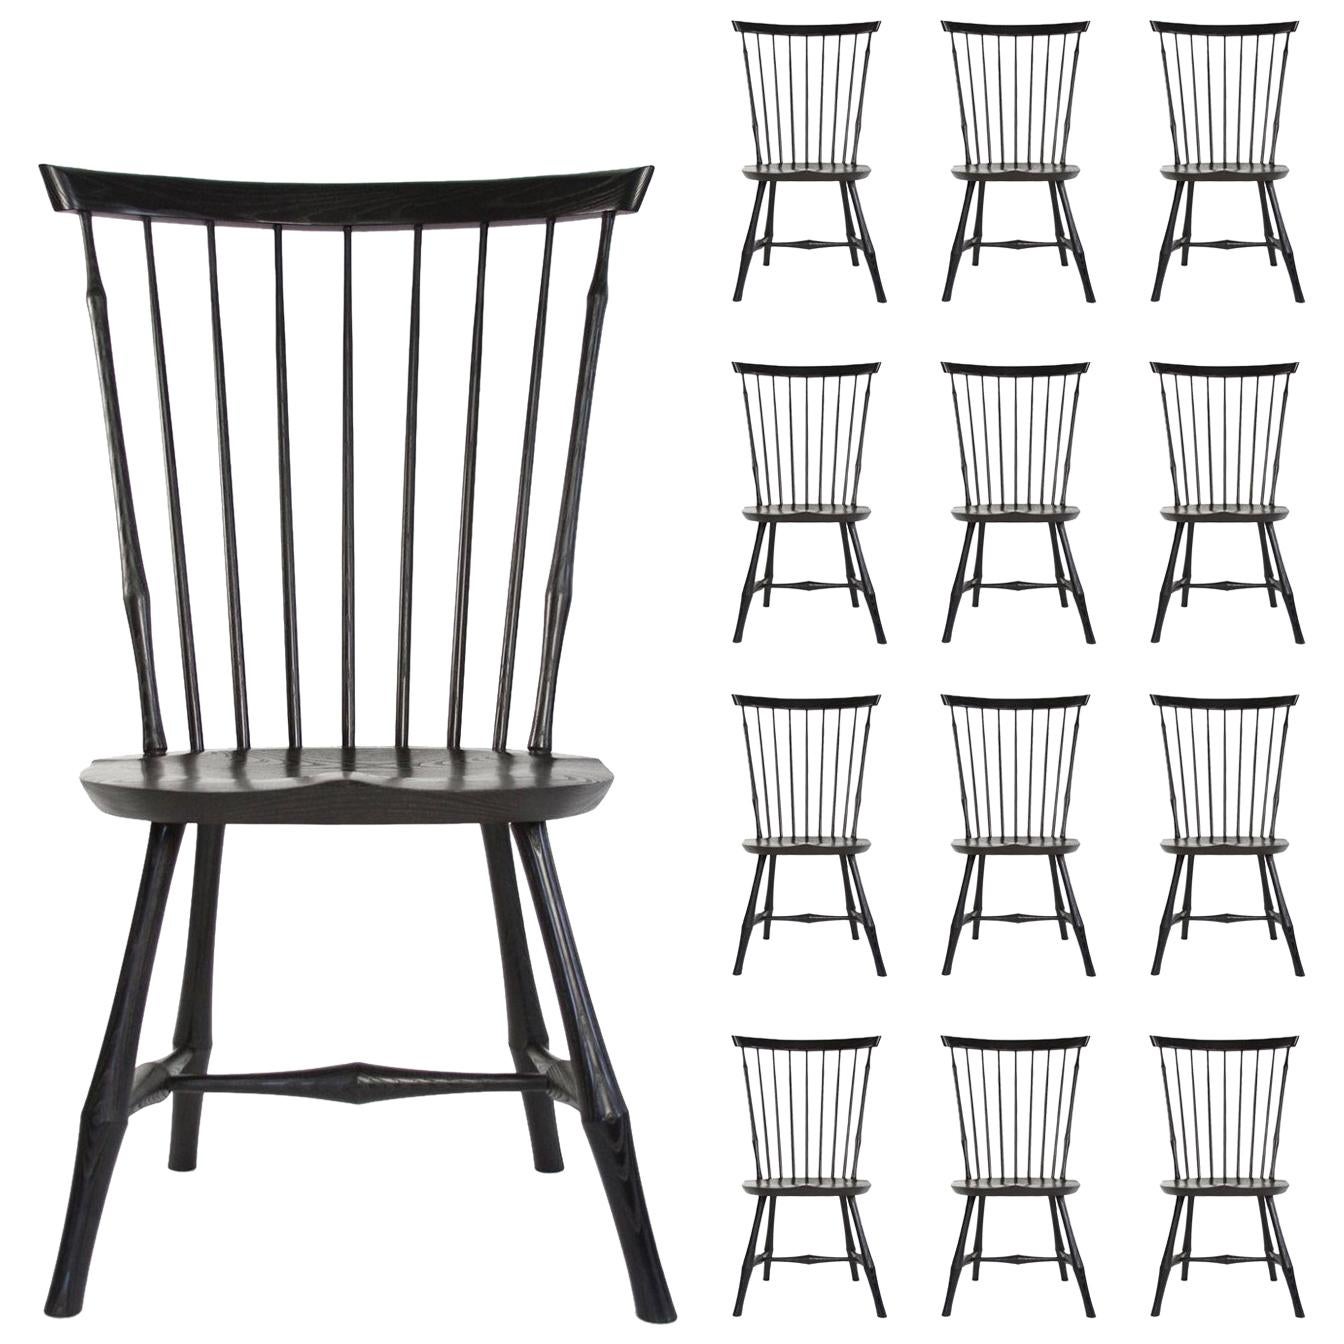 O&G Studio Windsor Dining Chair in Ebony, 25+ Available